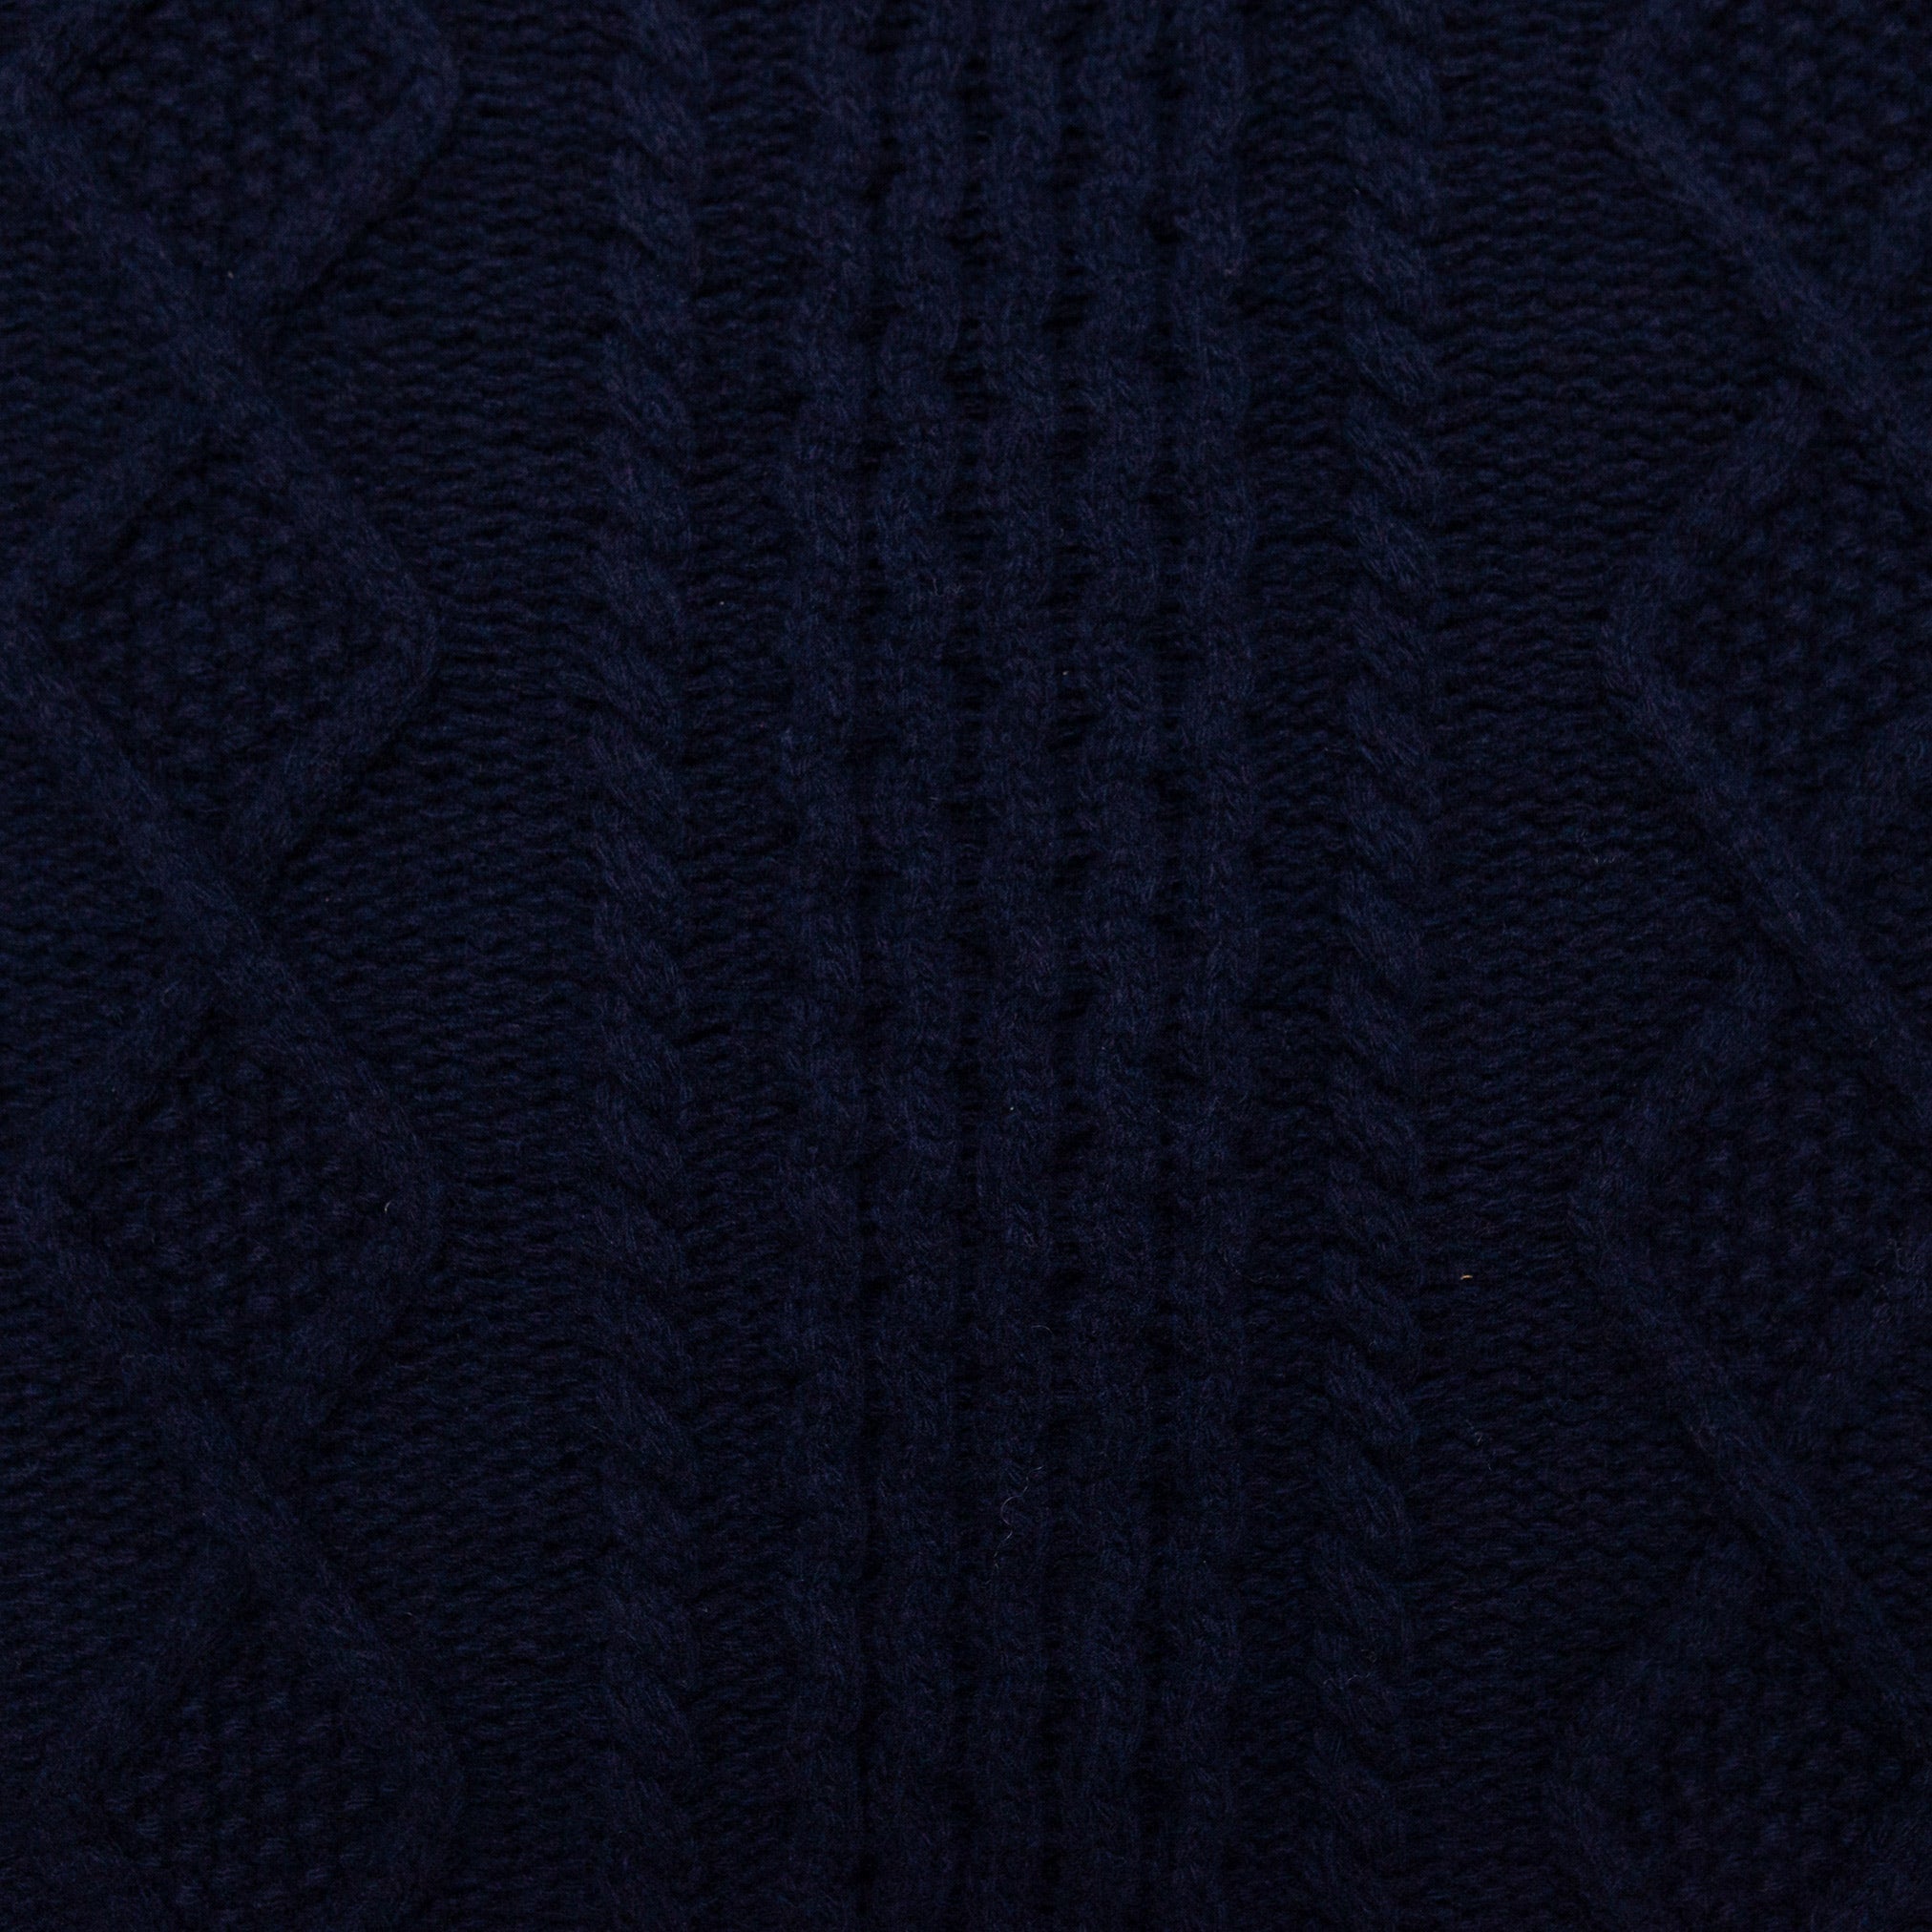 The King of Cool Sweater in Navy